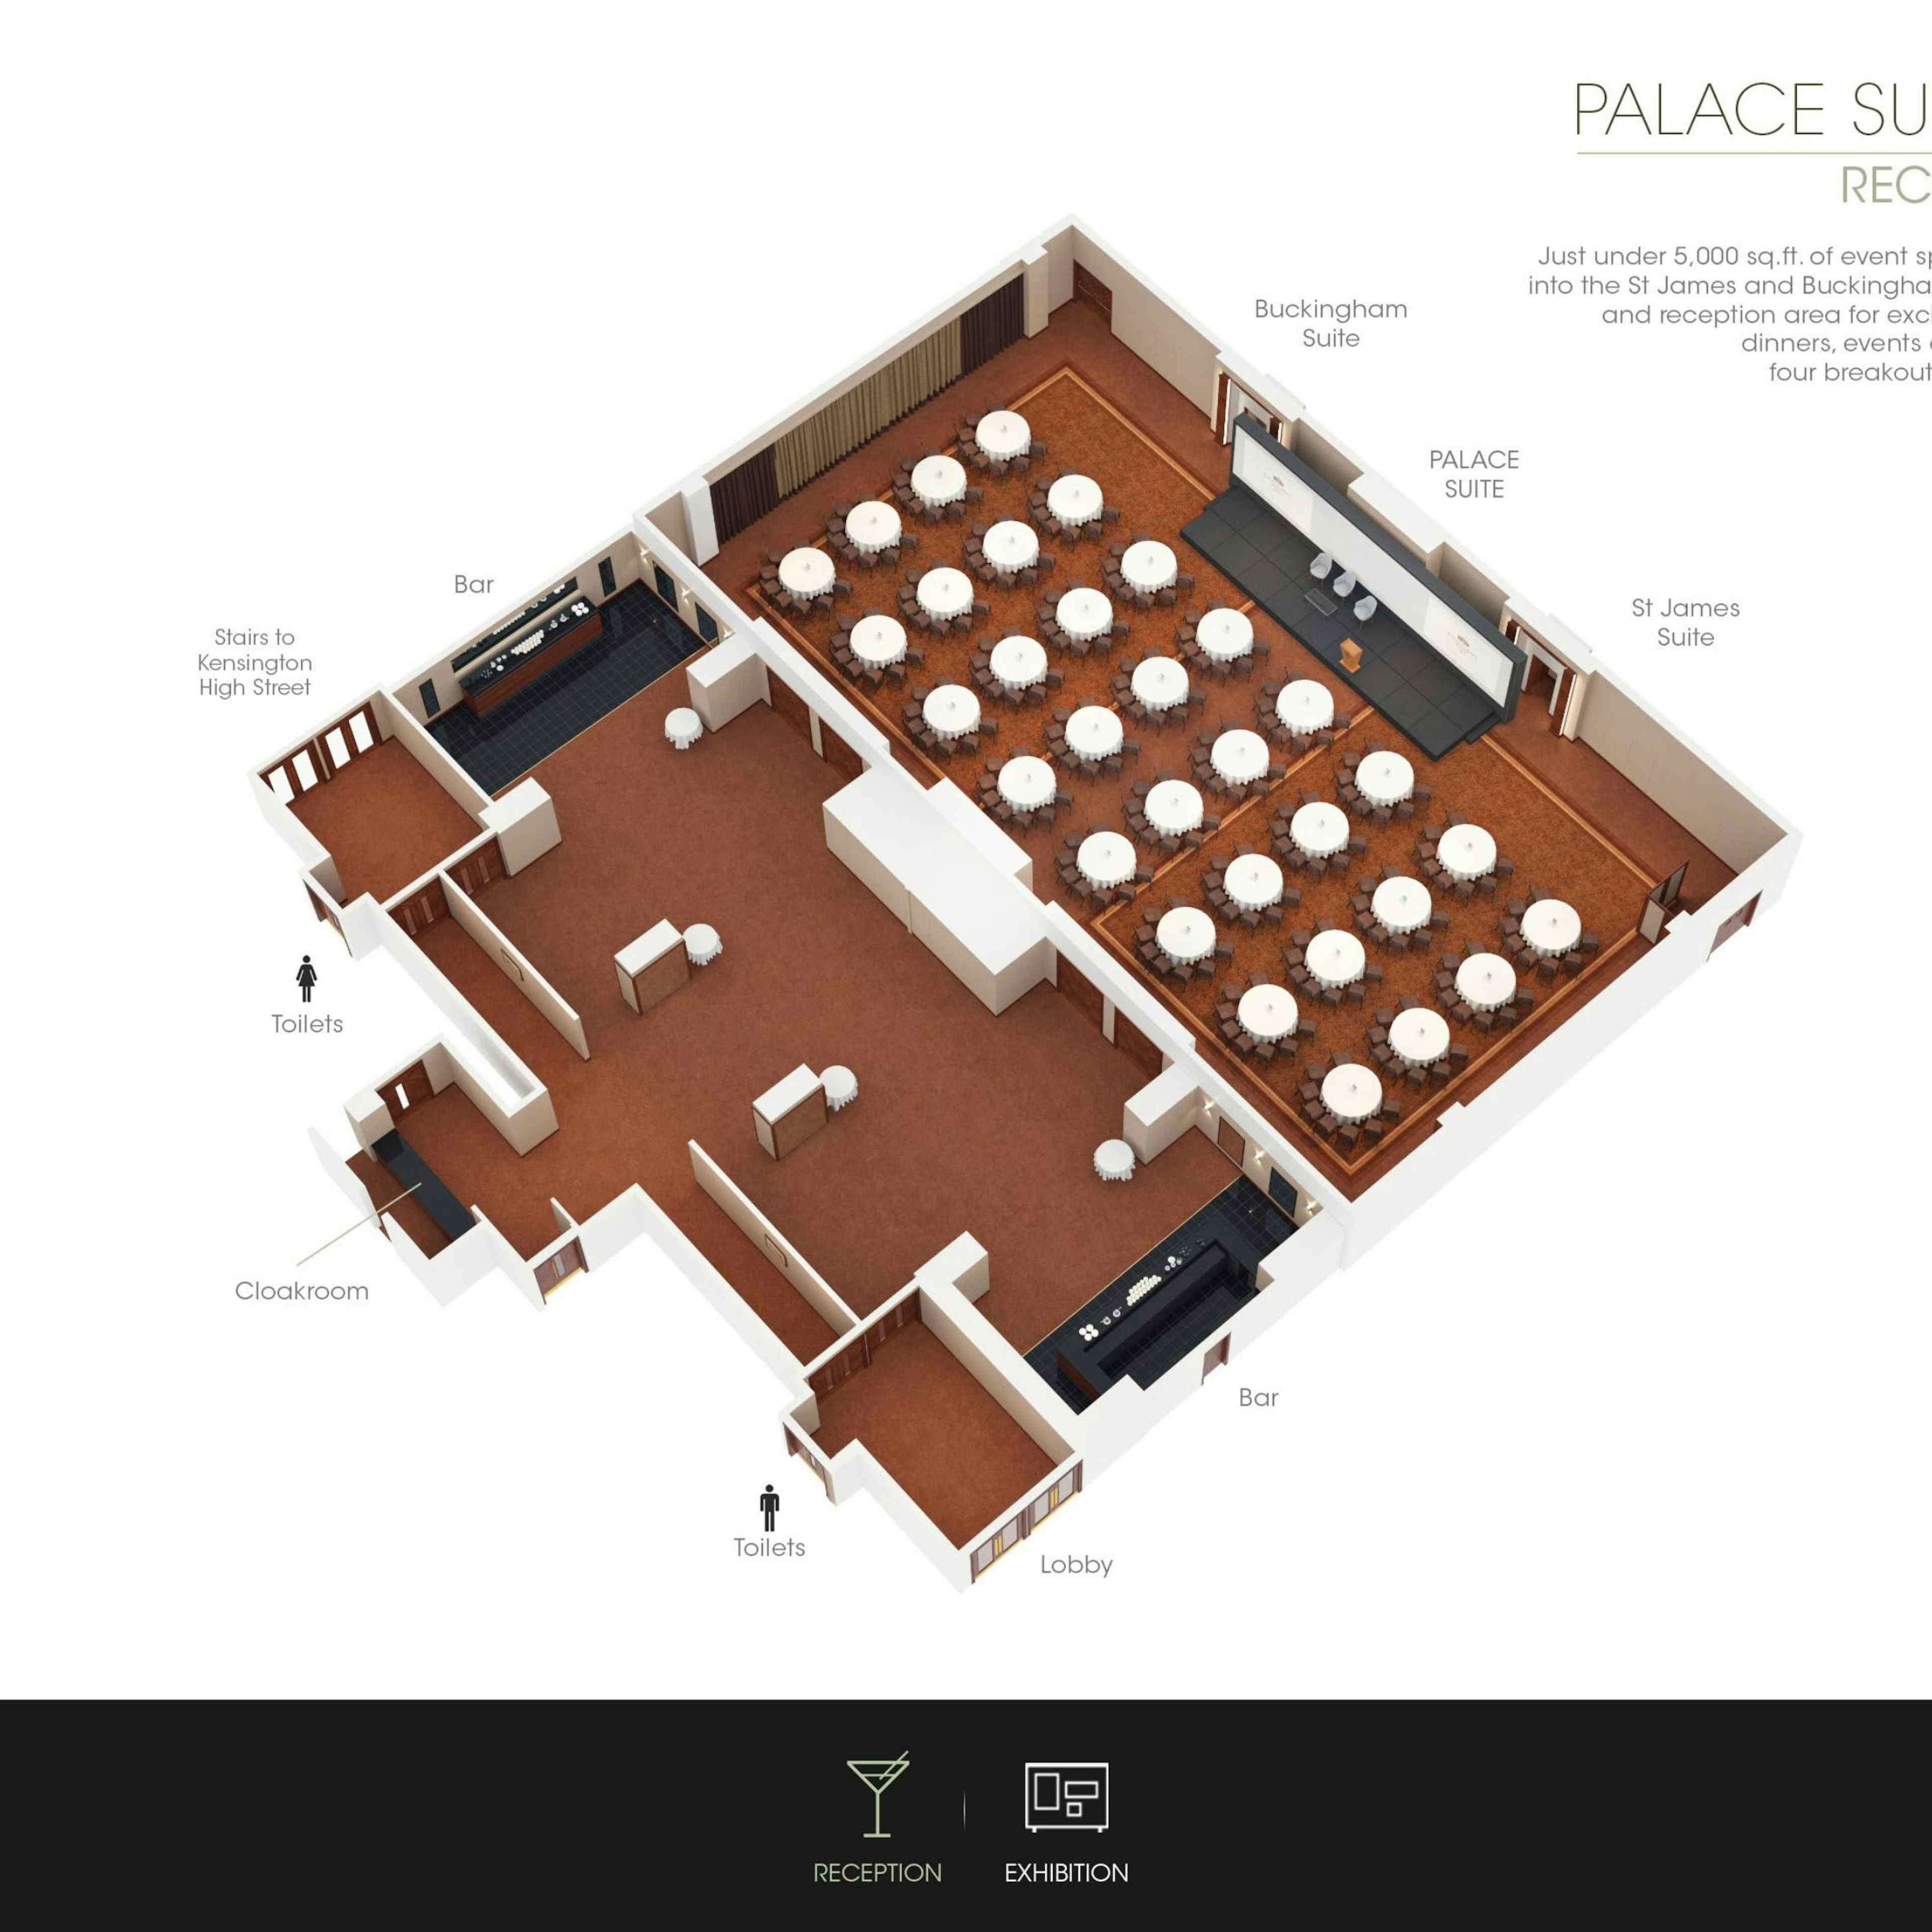 Royal Garden Hotel - Palace Suite image 2